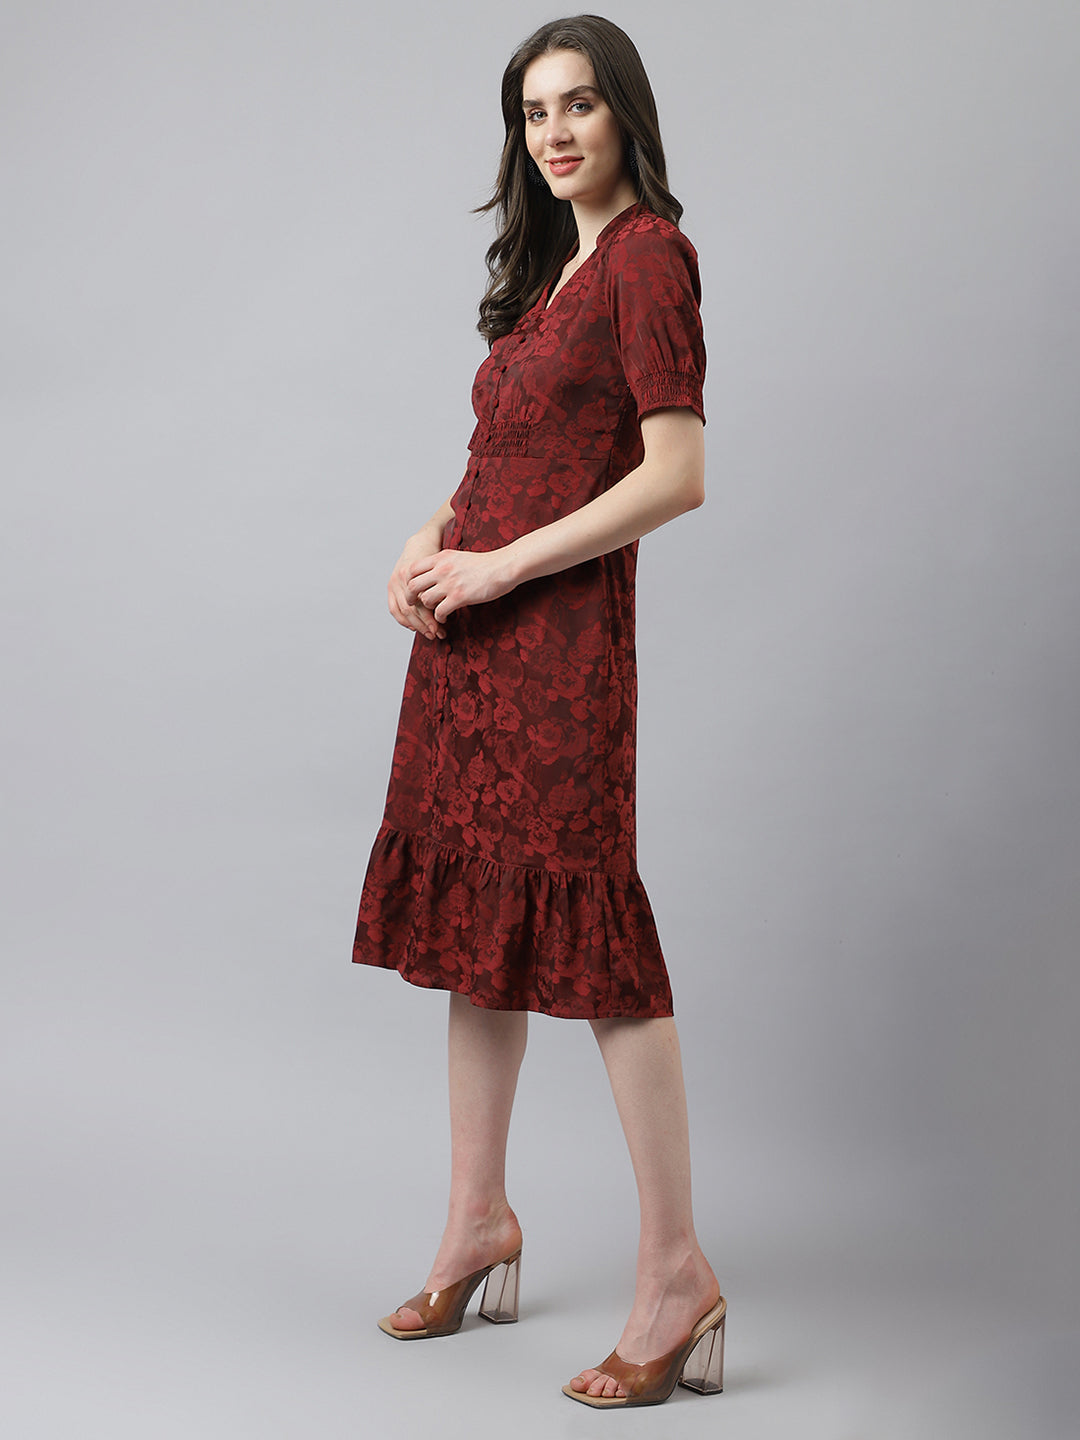 Maroon Short Sleeves V-Neck Printed Knee Length Dress For Casual Wear